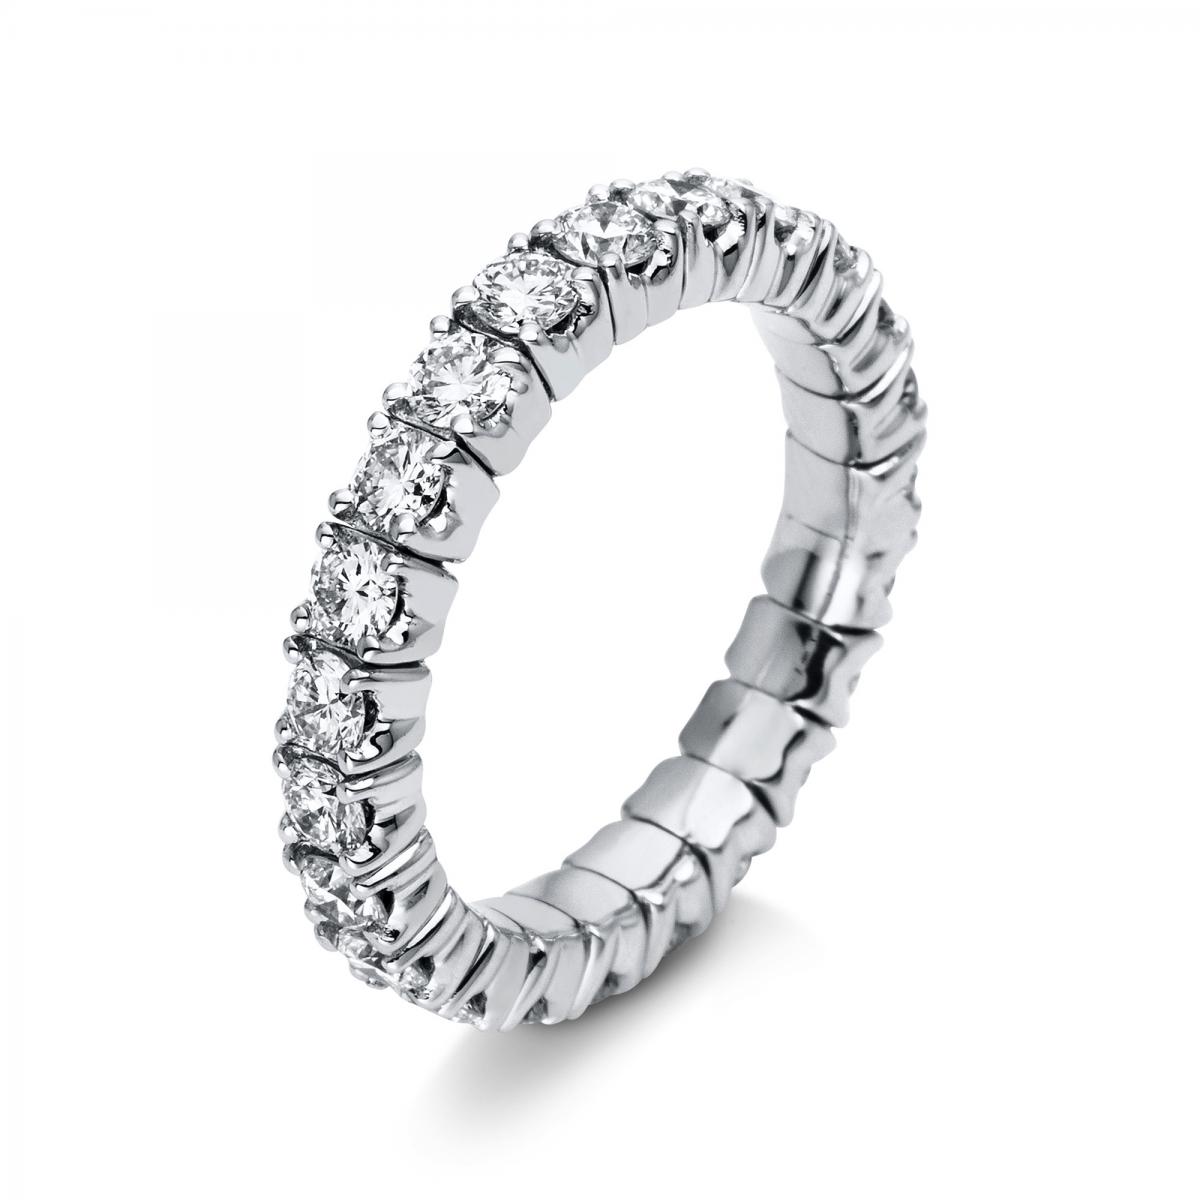 Ring 18 ct white gold with 23 brilliants ca. 1,81 ct, size 53